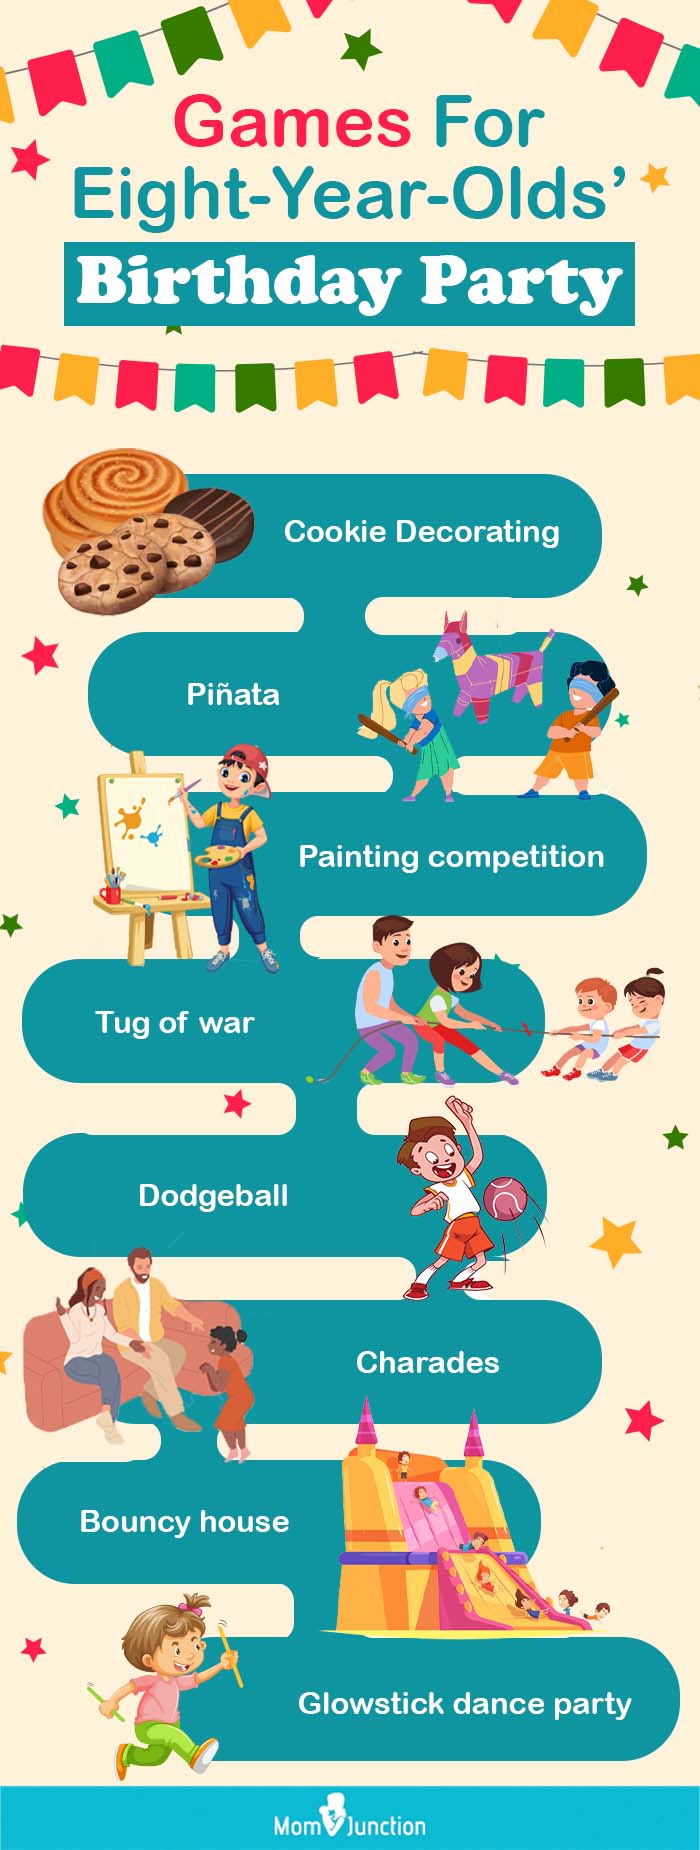 games and activities ideas for eight year old (infographic)